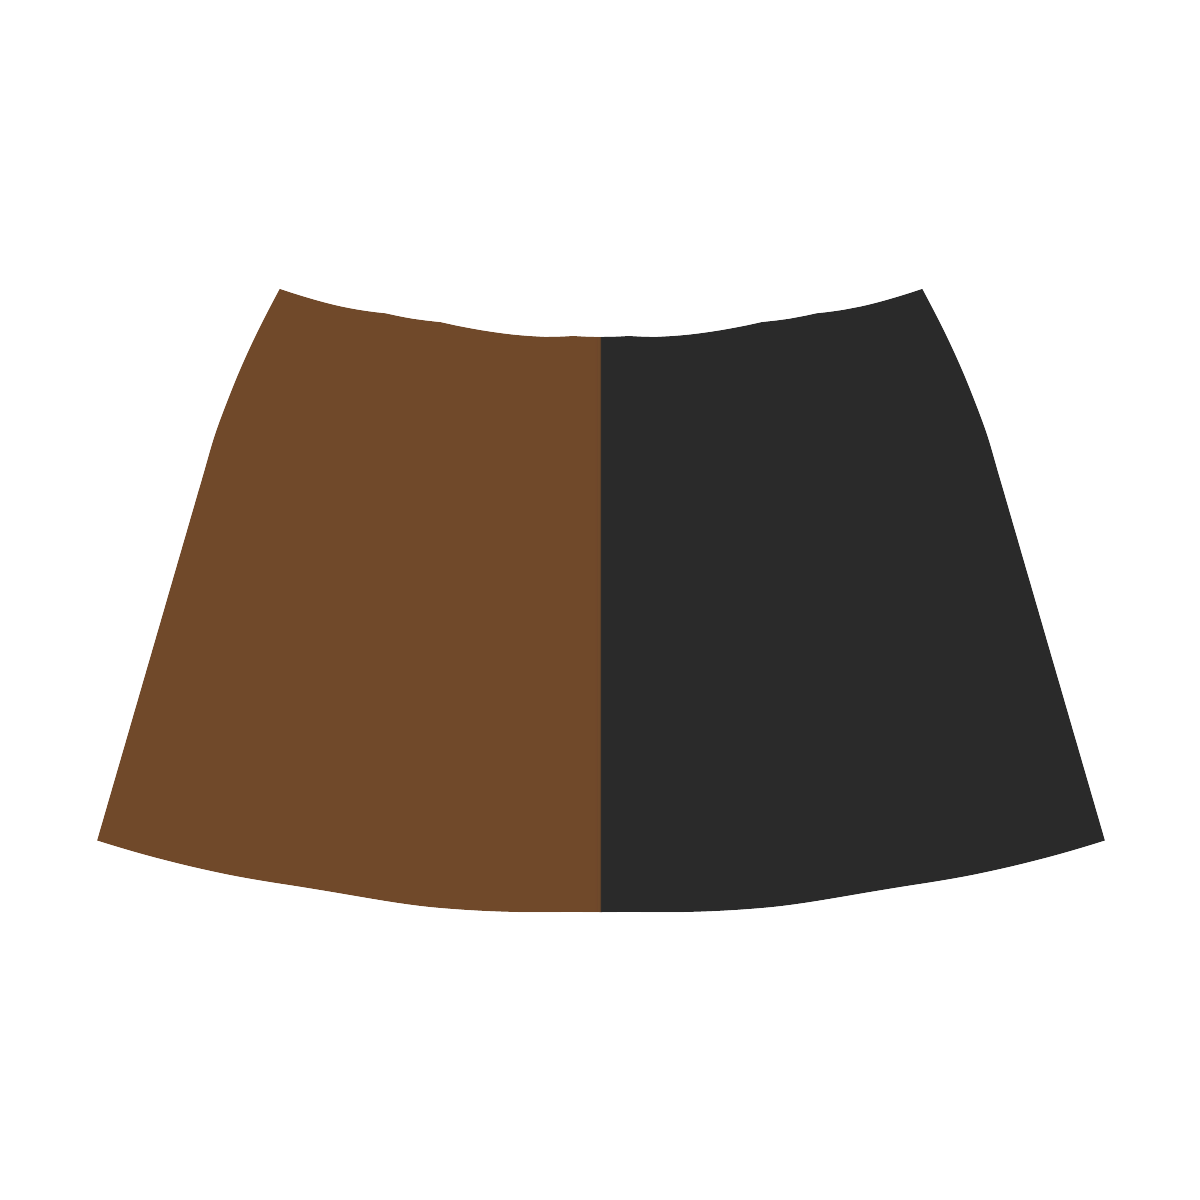 Only two Colors: Dark Brown - Black Mnemosyne Women's Crepe Skirt (Model D16)